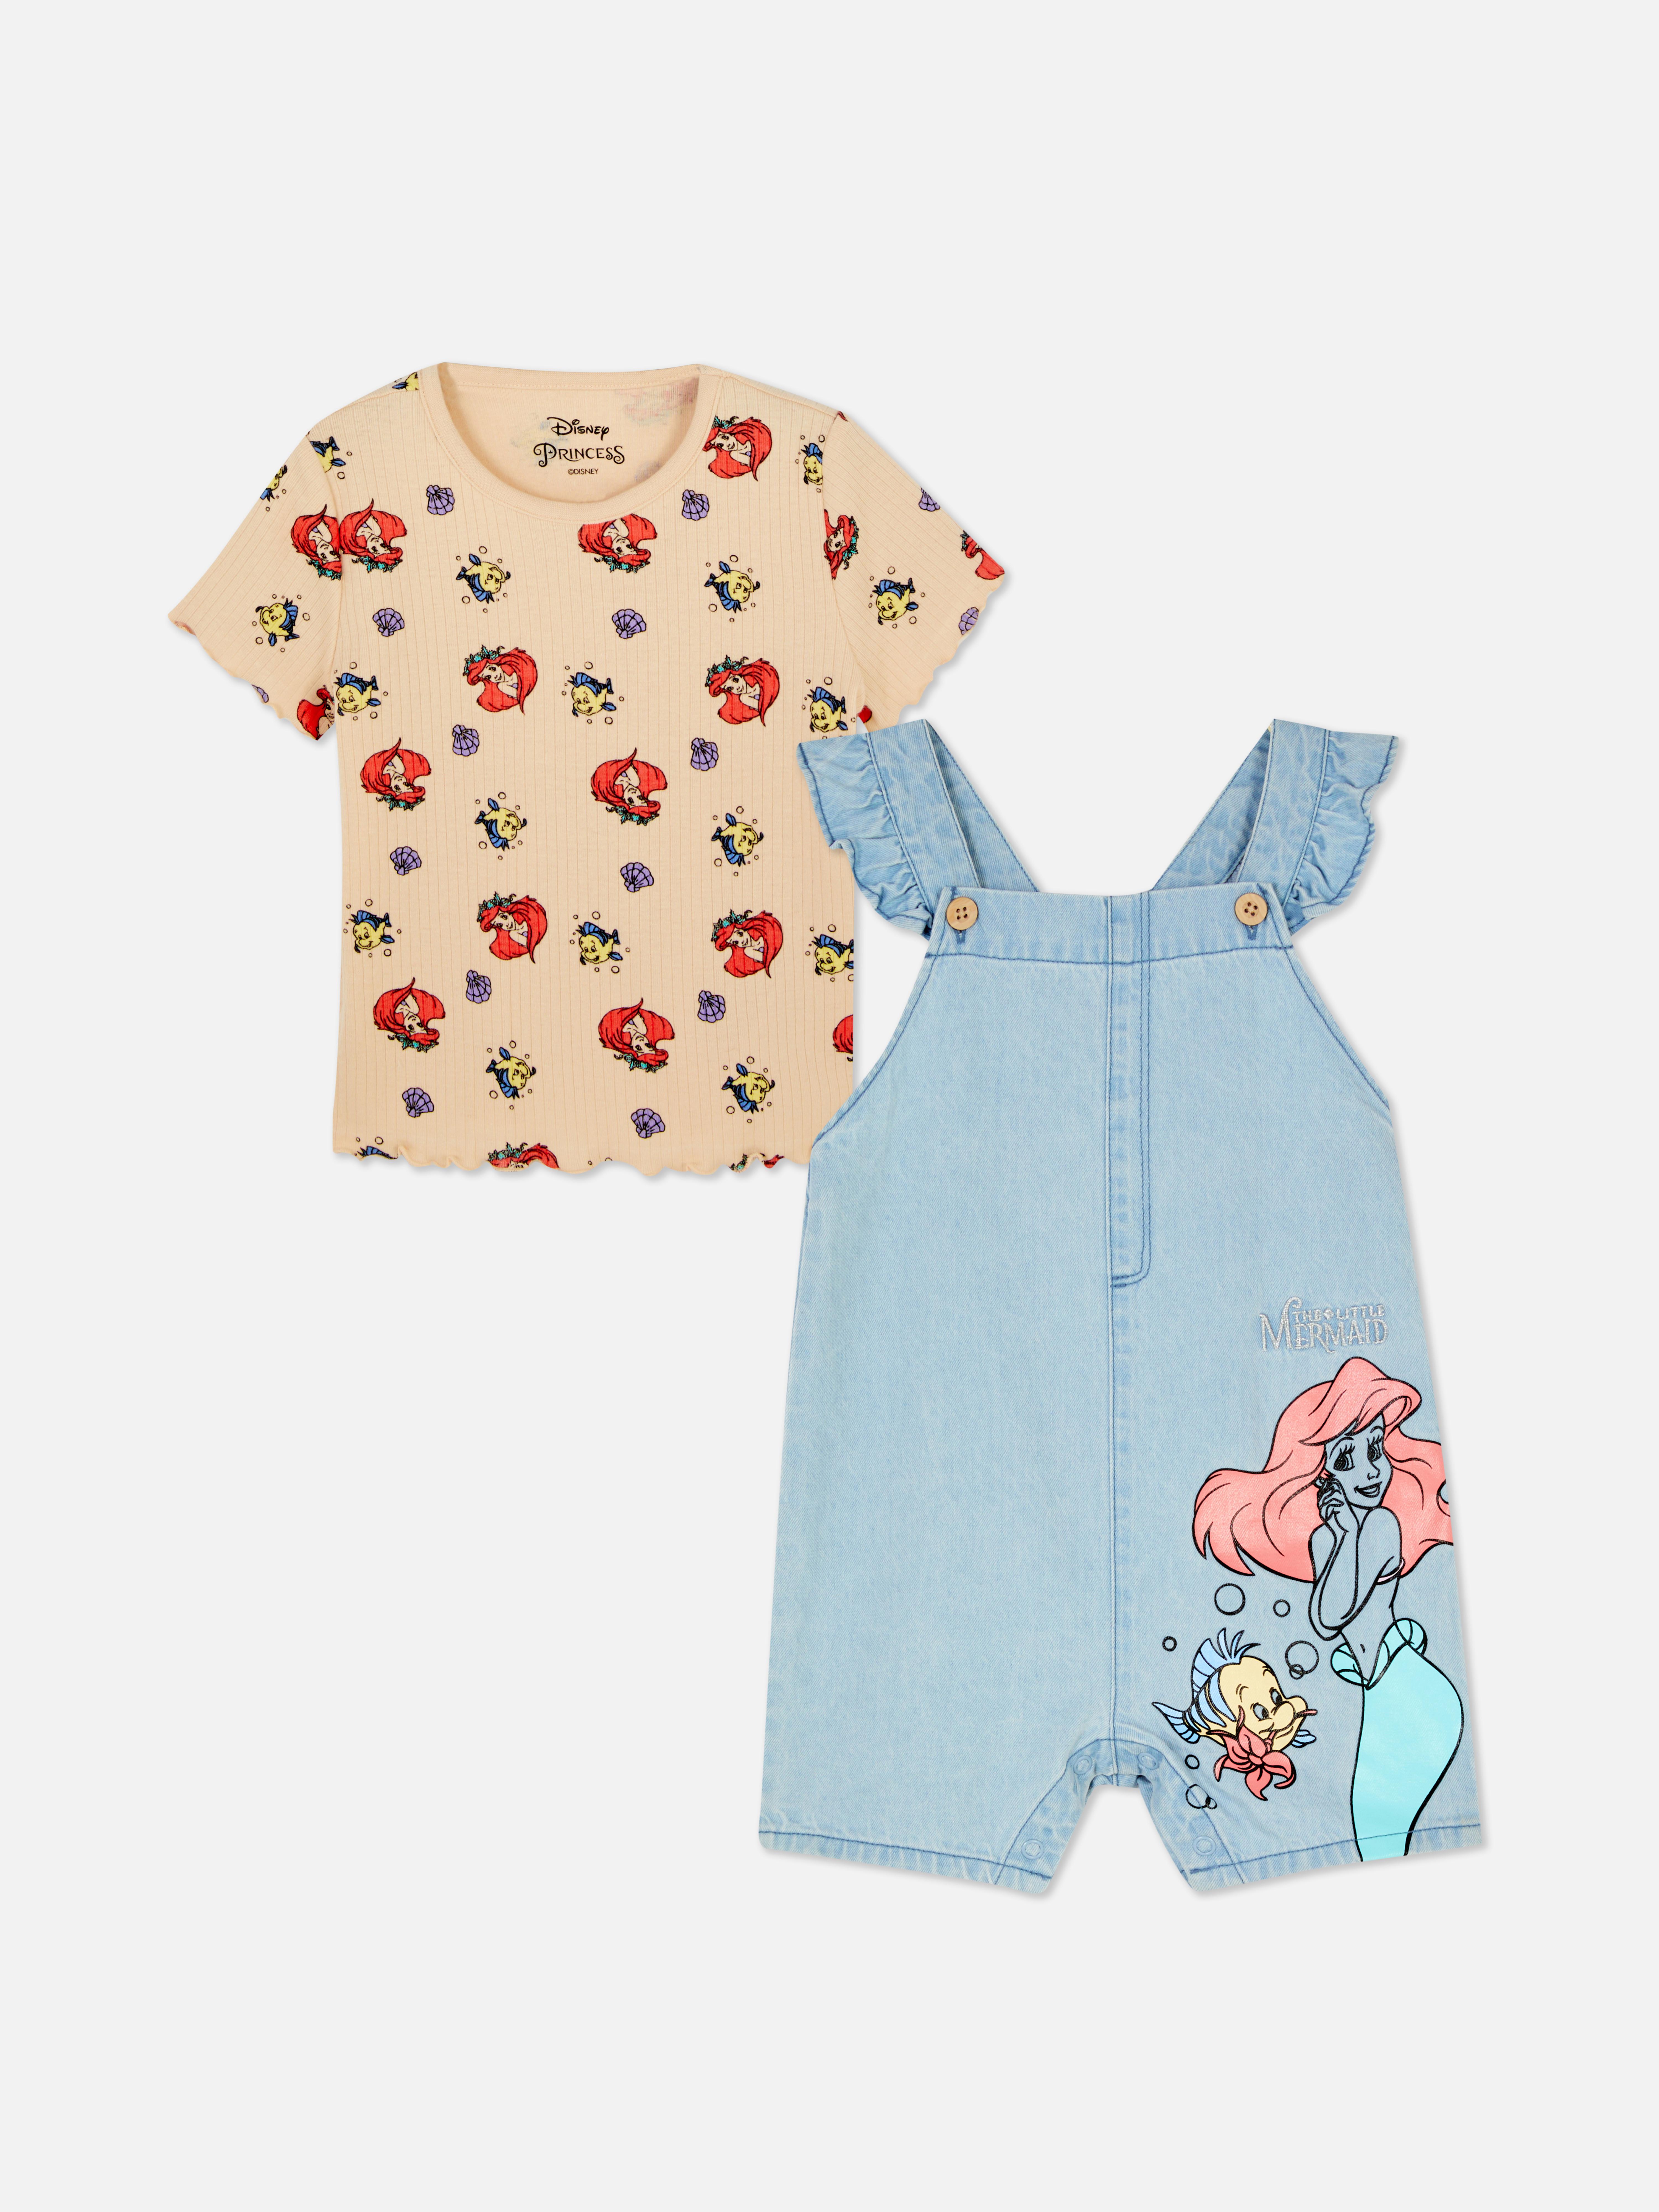 Disney’s The Little Mermaid T-Shirt and Dungaree Set